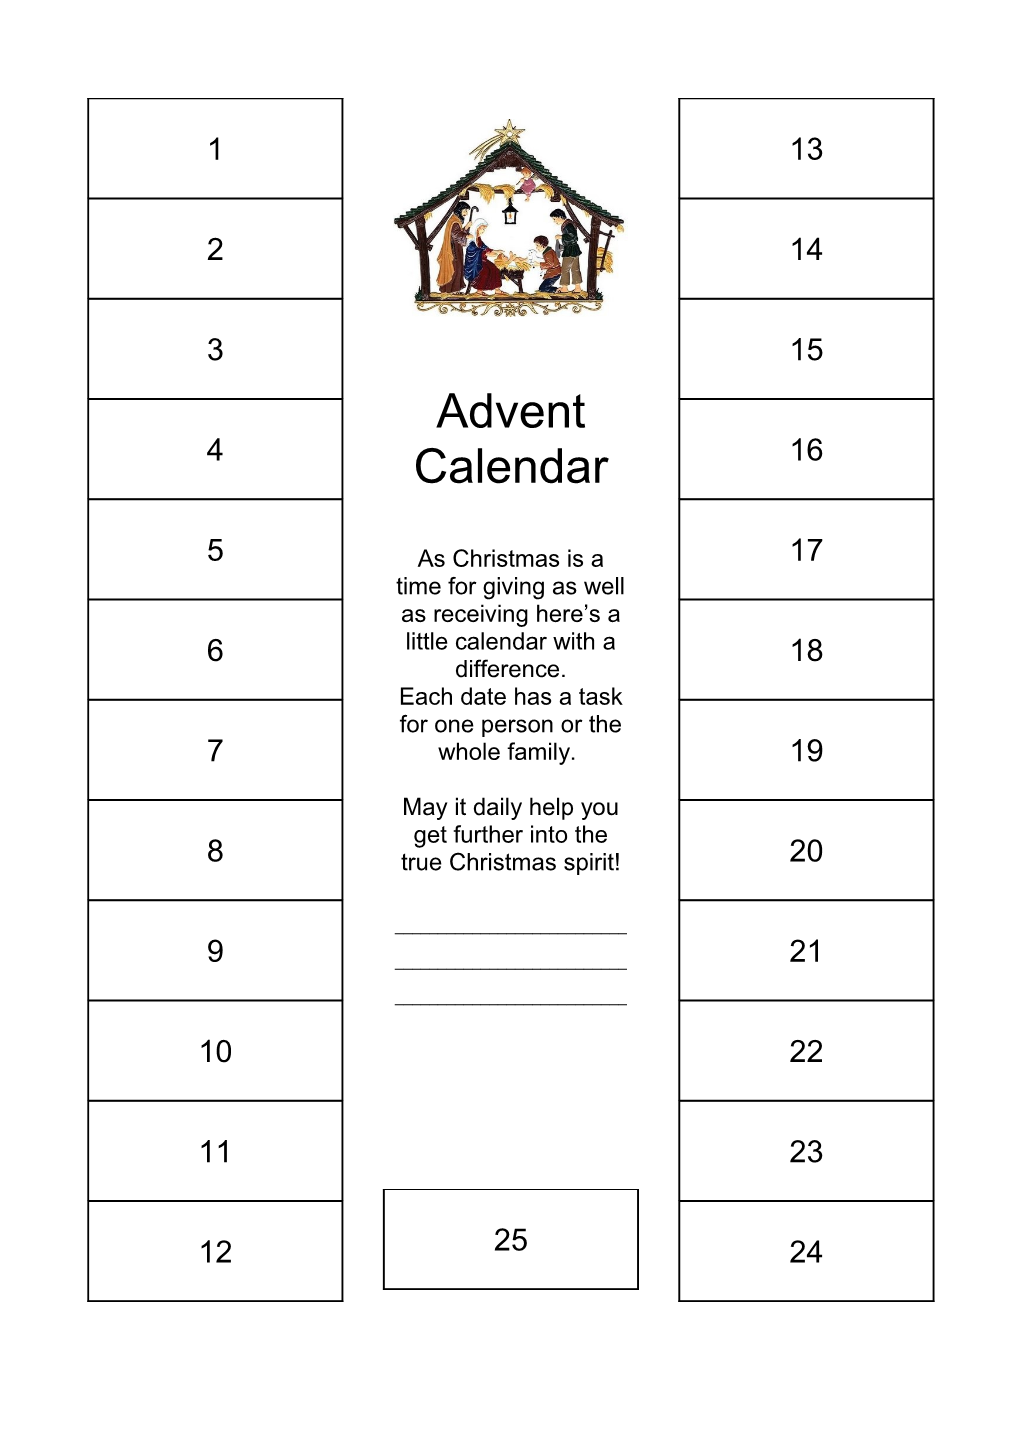 Write a Christmas Prayer Together to Say for the Whole of the Calender